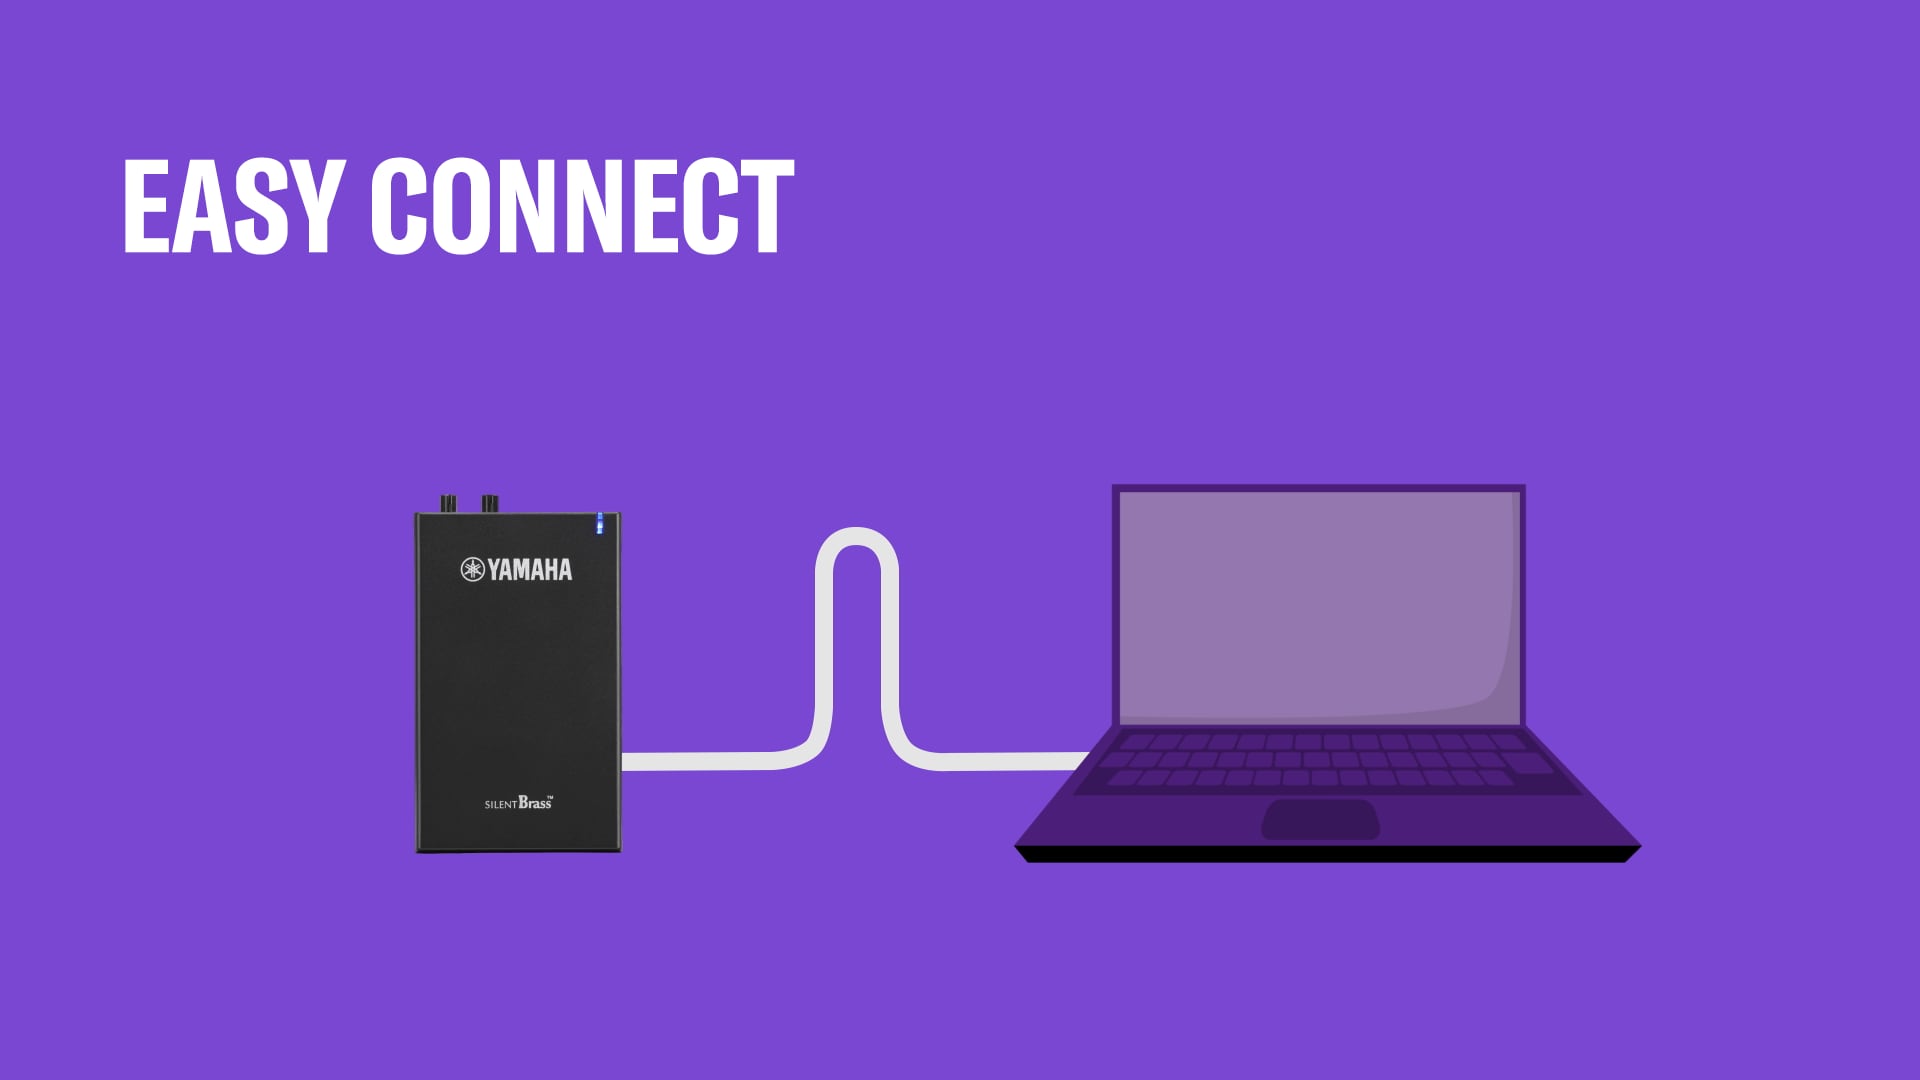 Feature image showing Easy Connect with Micro USB